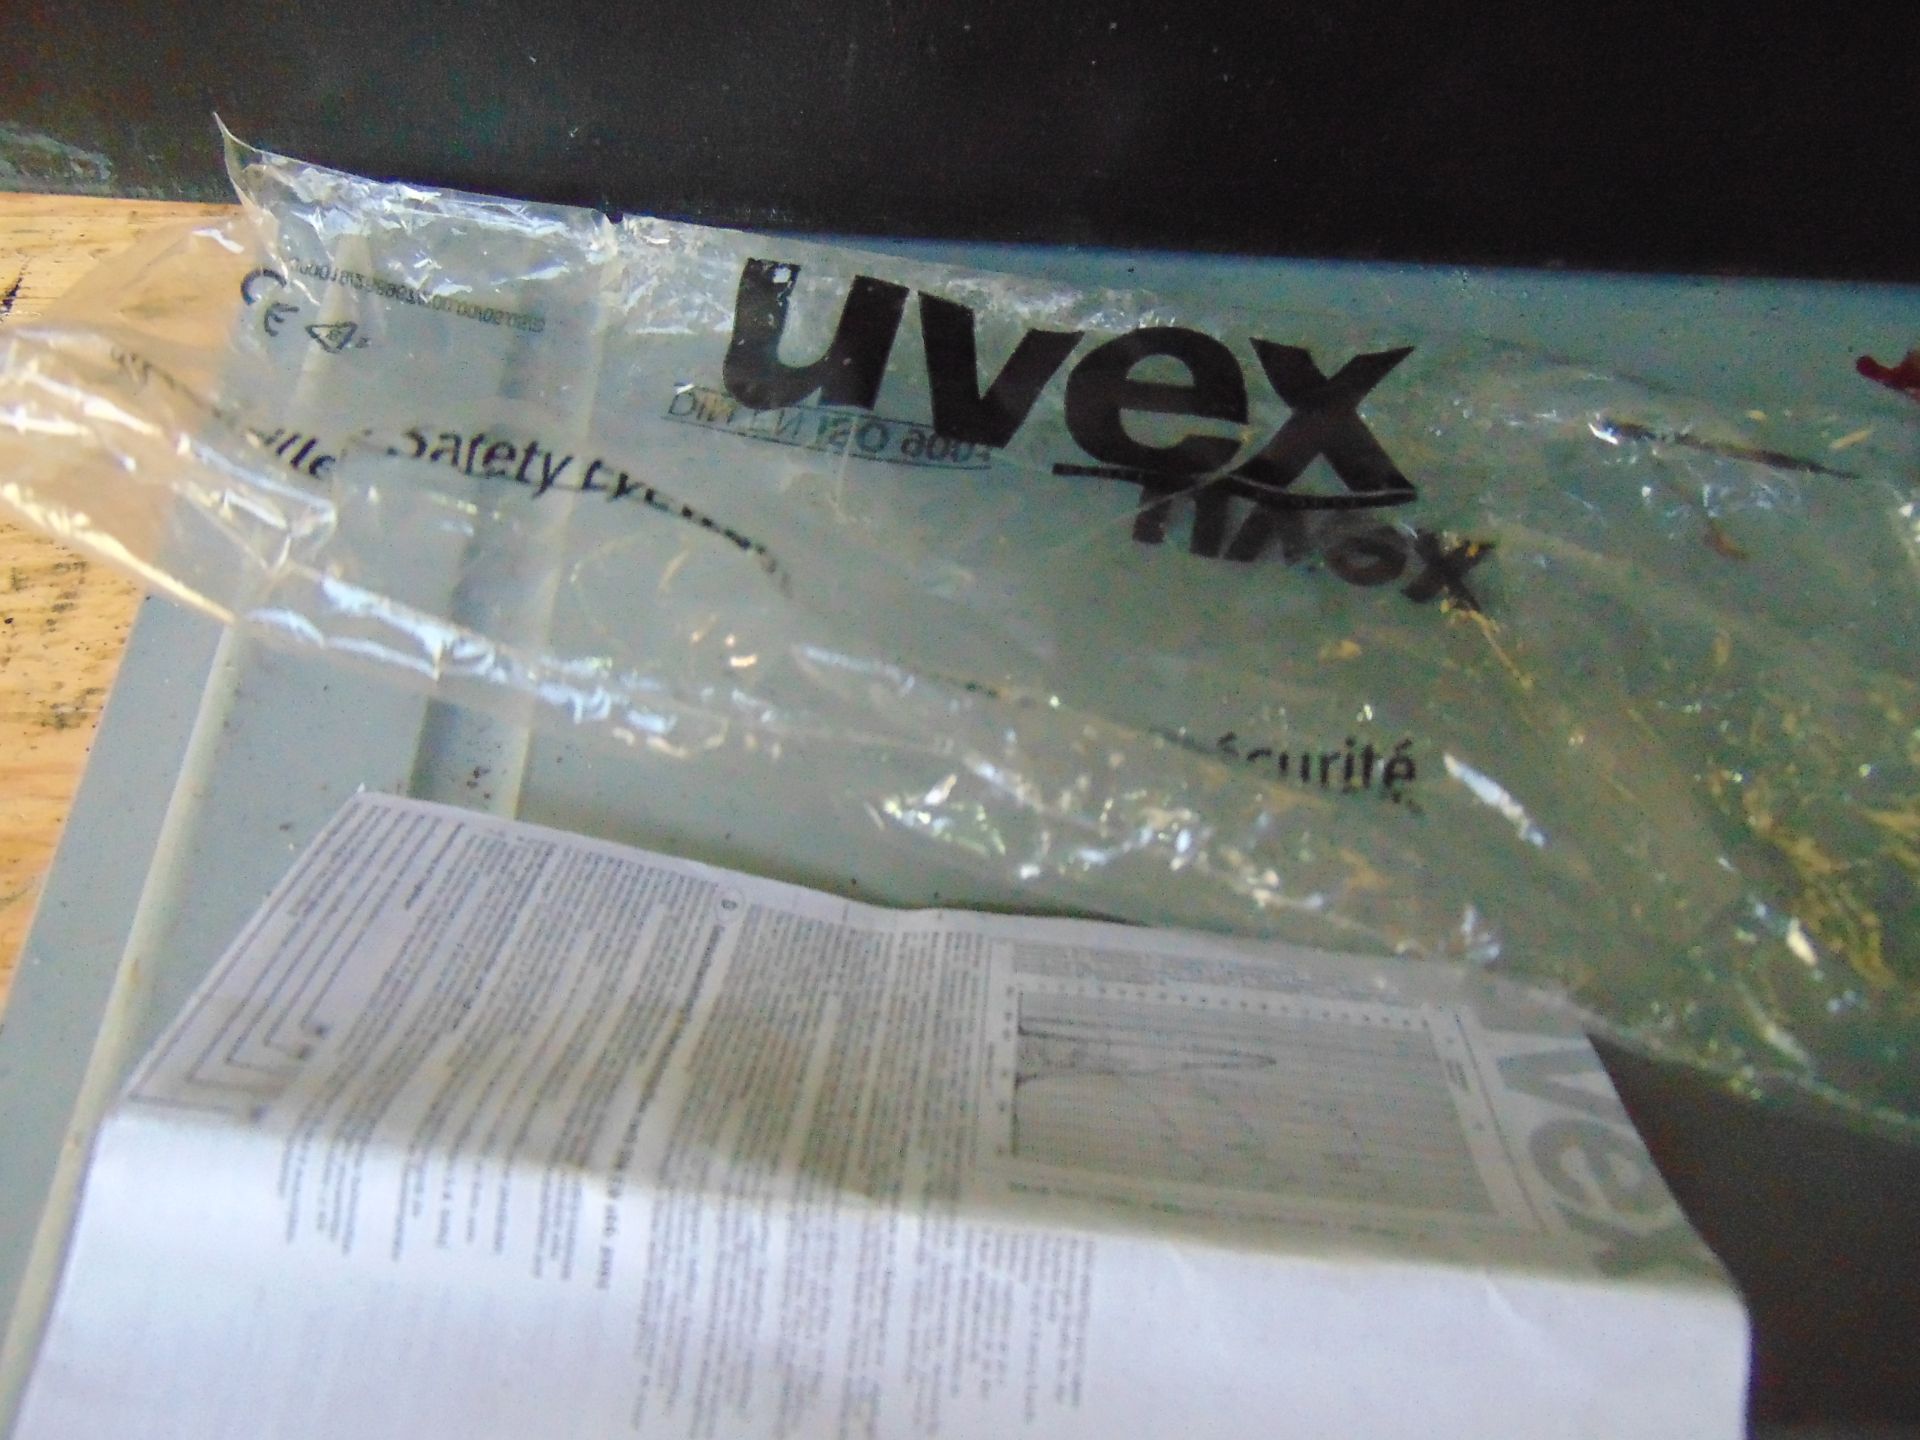 10 Pairs of Uvex New Unissued Safety Glassed MoD Reserve Stock - Image 4 of 6